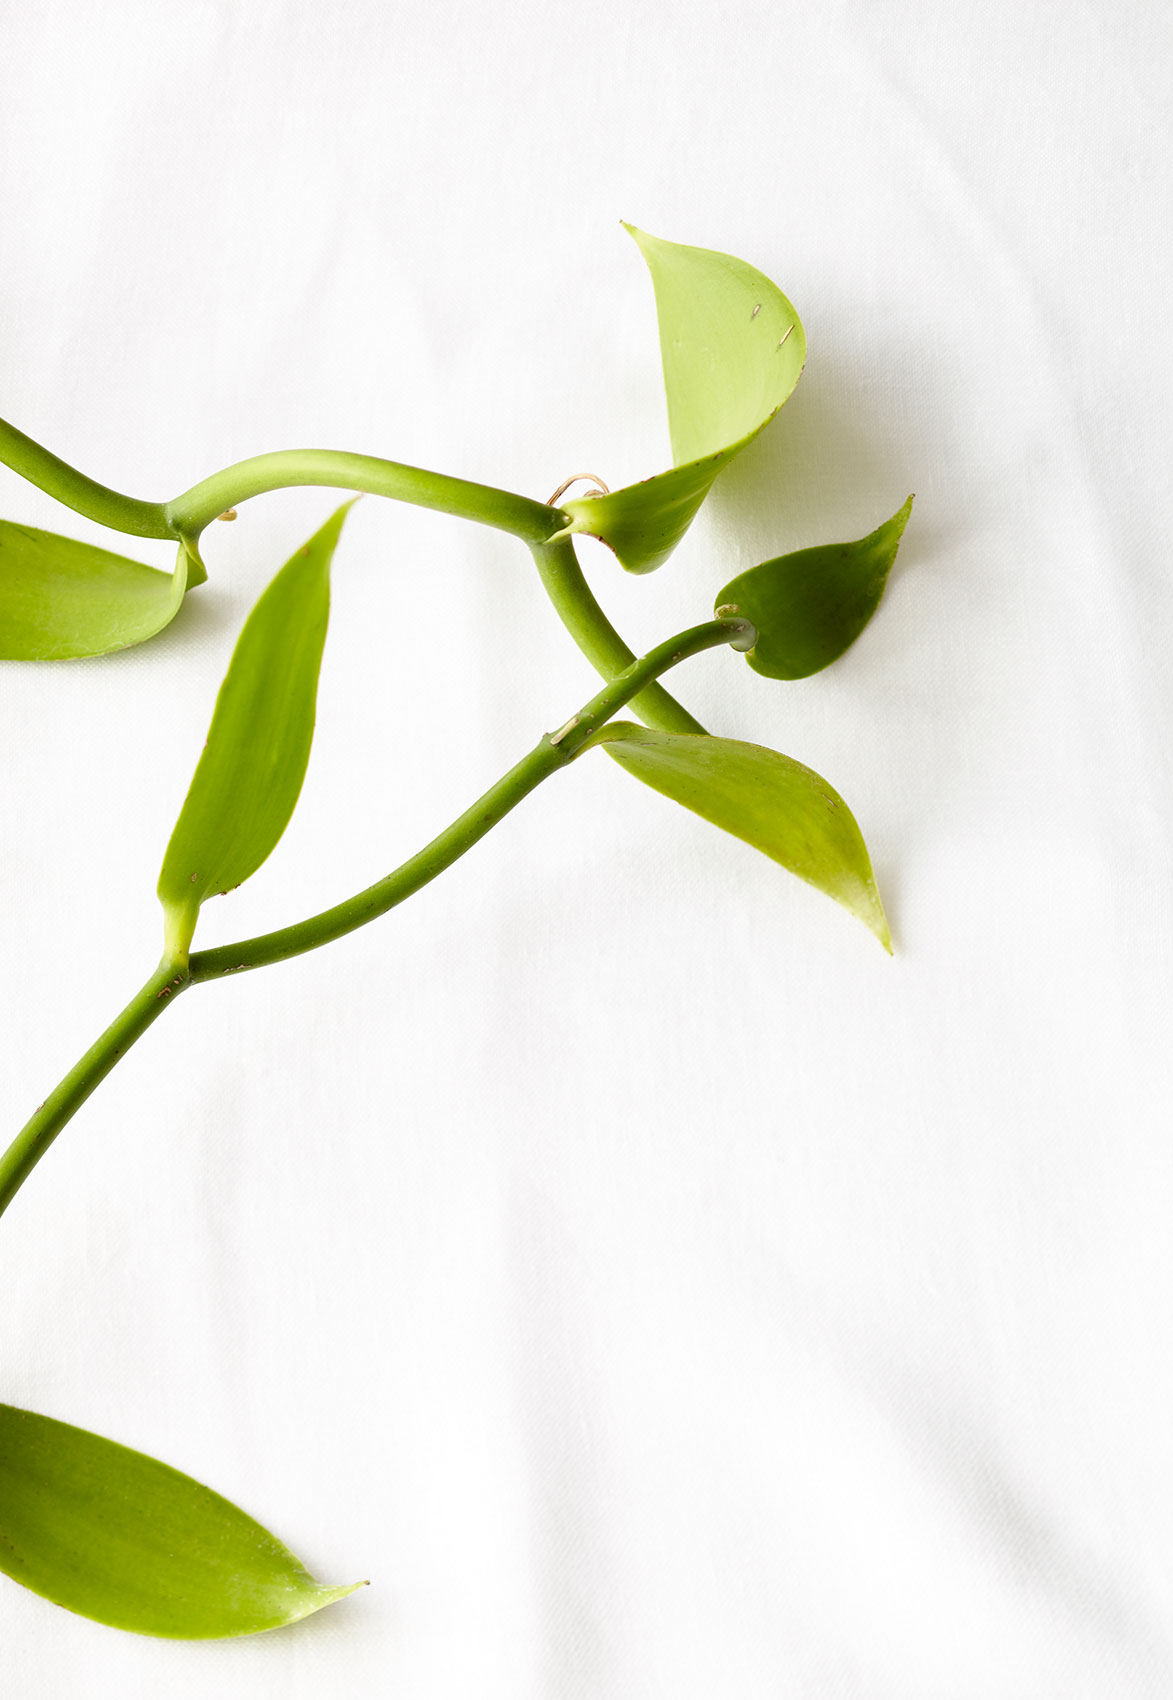 Vanilla Table • Natural Vanilla Bean Plant Leaves on Textured White Cloth • Cookbook & Editorial Food Photography